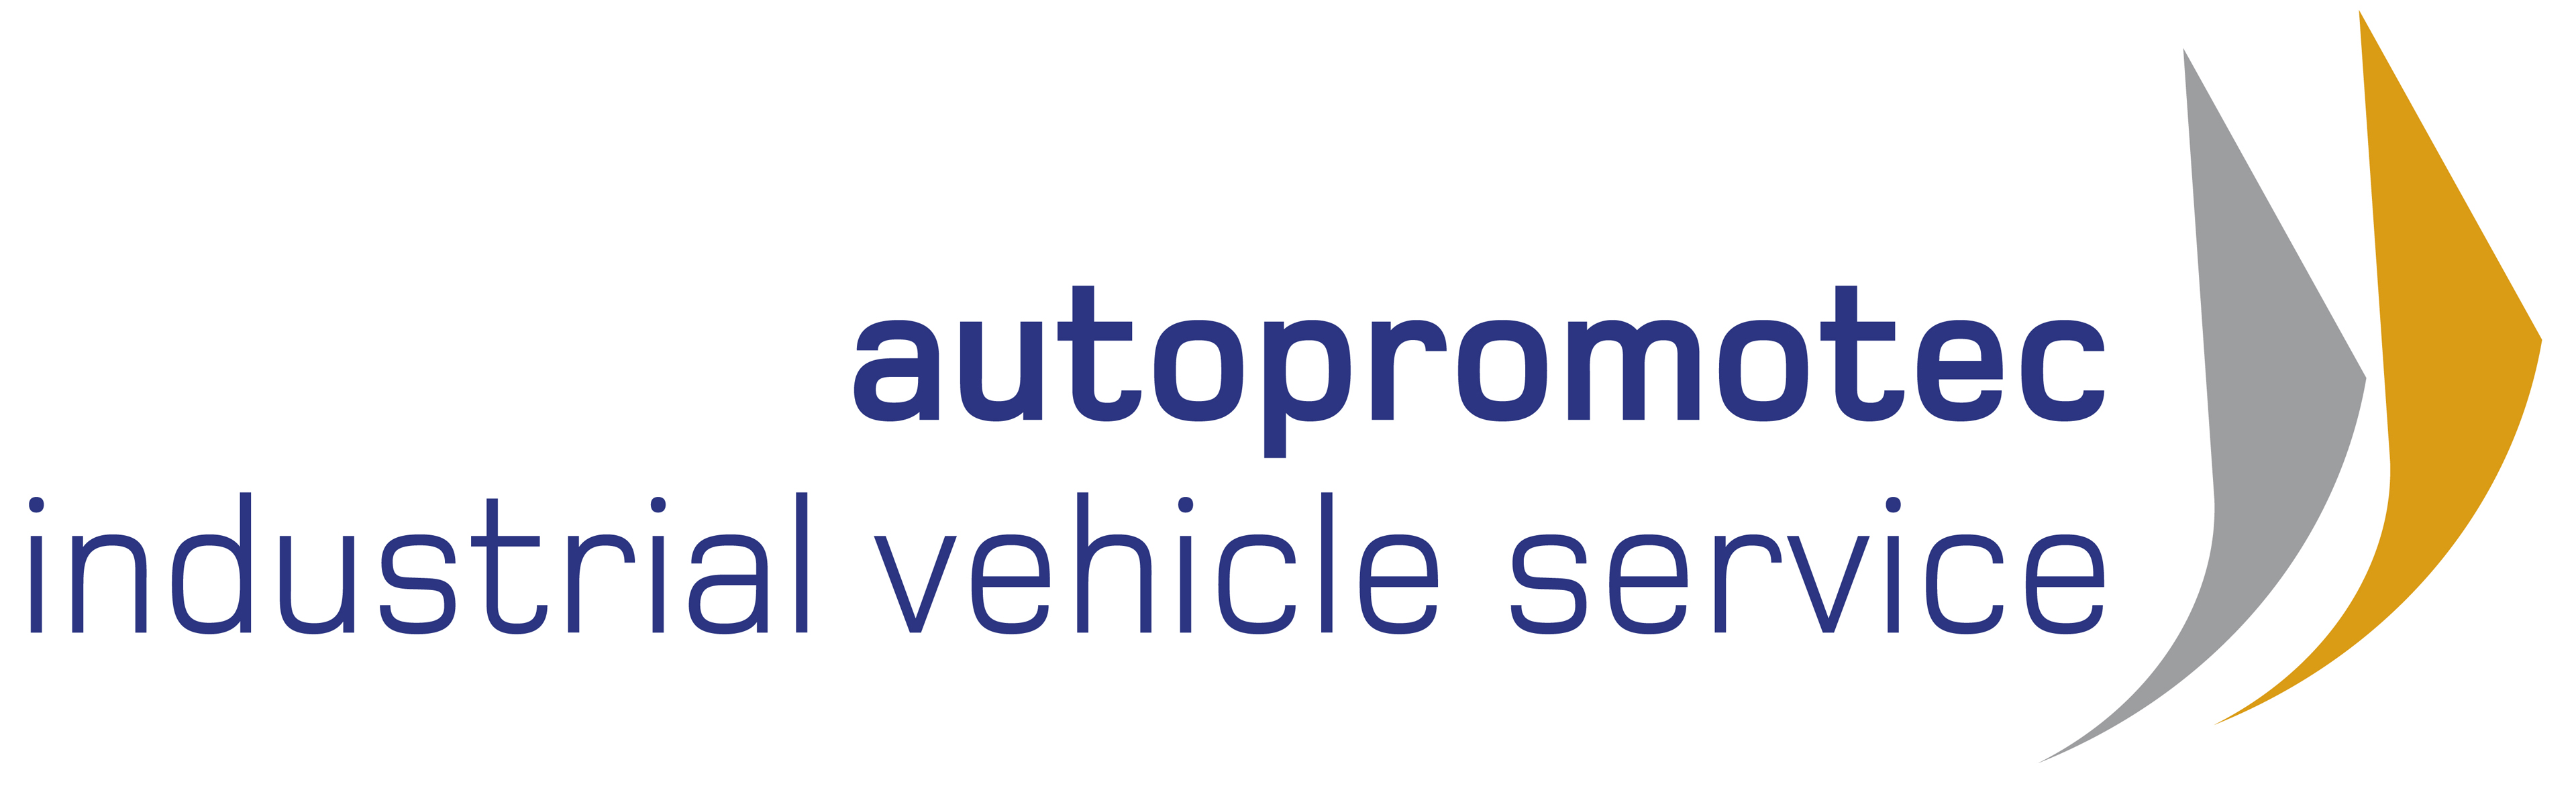 Autopromotec adds Industrial Vehicle Service to 2015 show